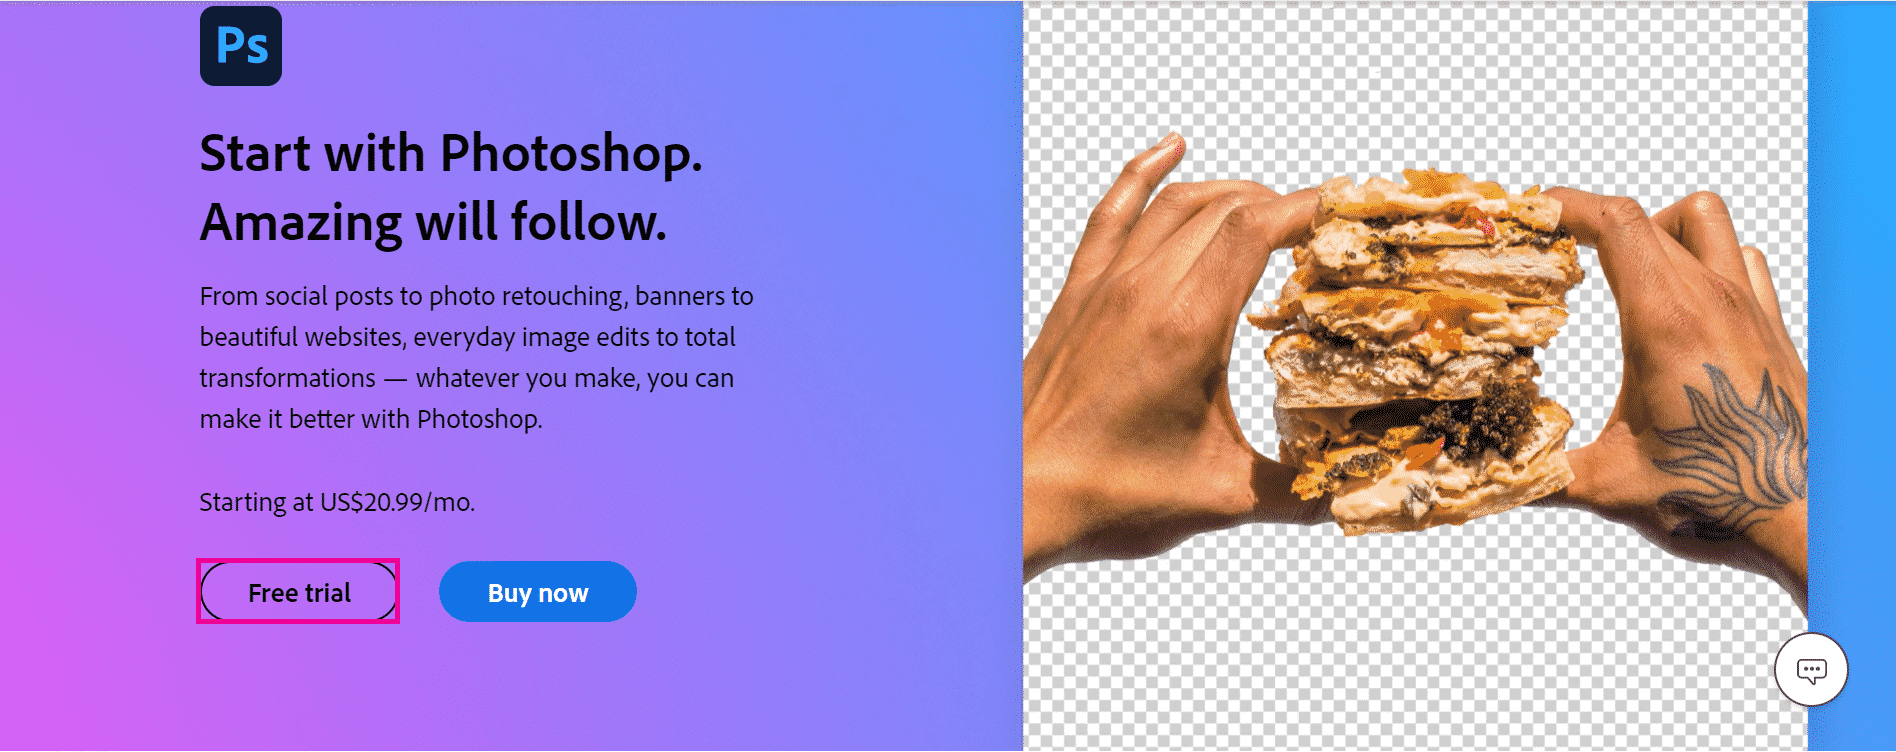 how to download photoshop for free college